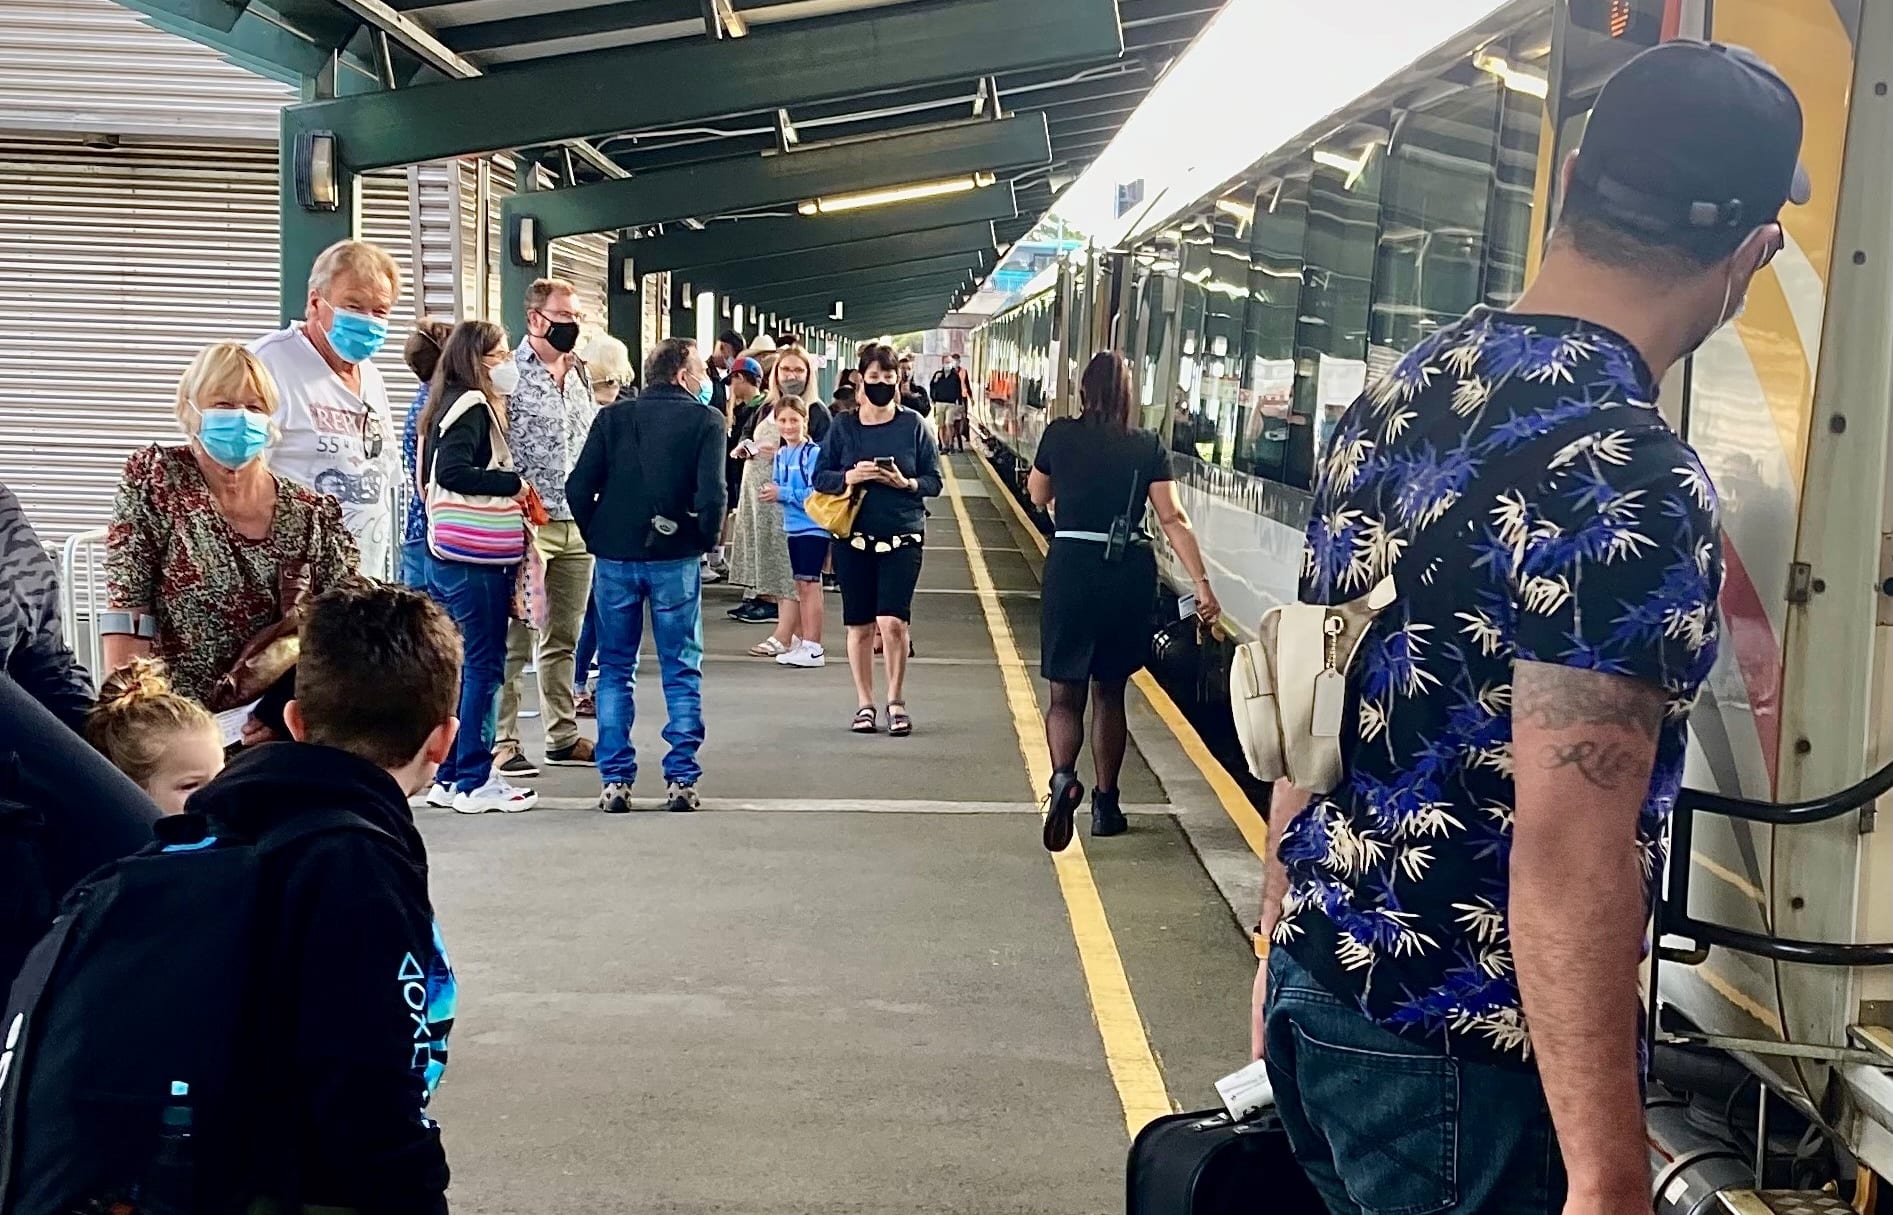 Passengers board the TranzAlpine which resumed service on 14 January, 2022 after a period of Covid-19 restrictions forced it to be suspended.